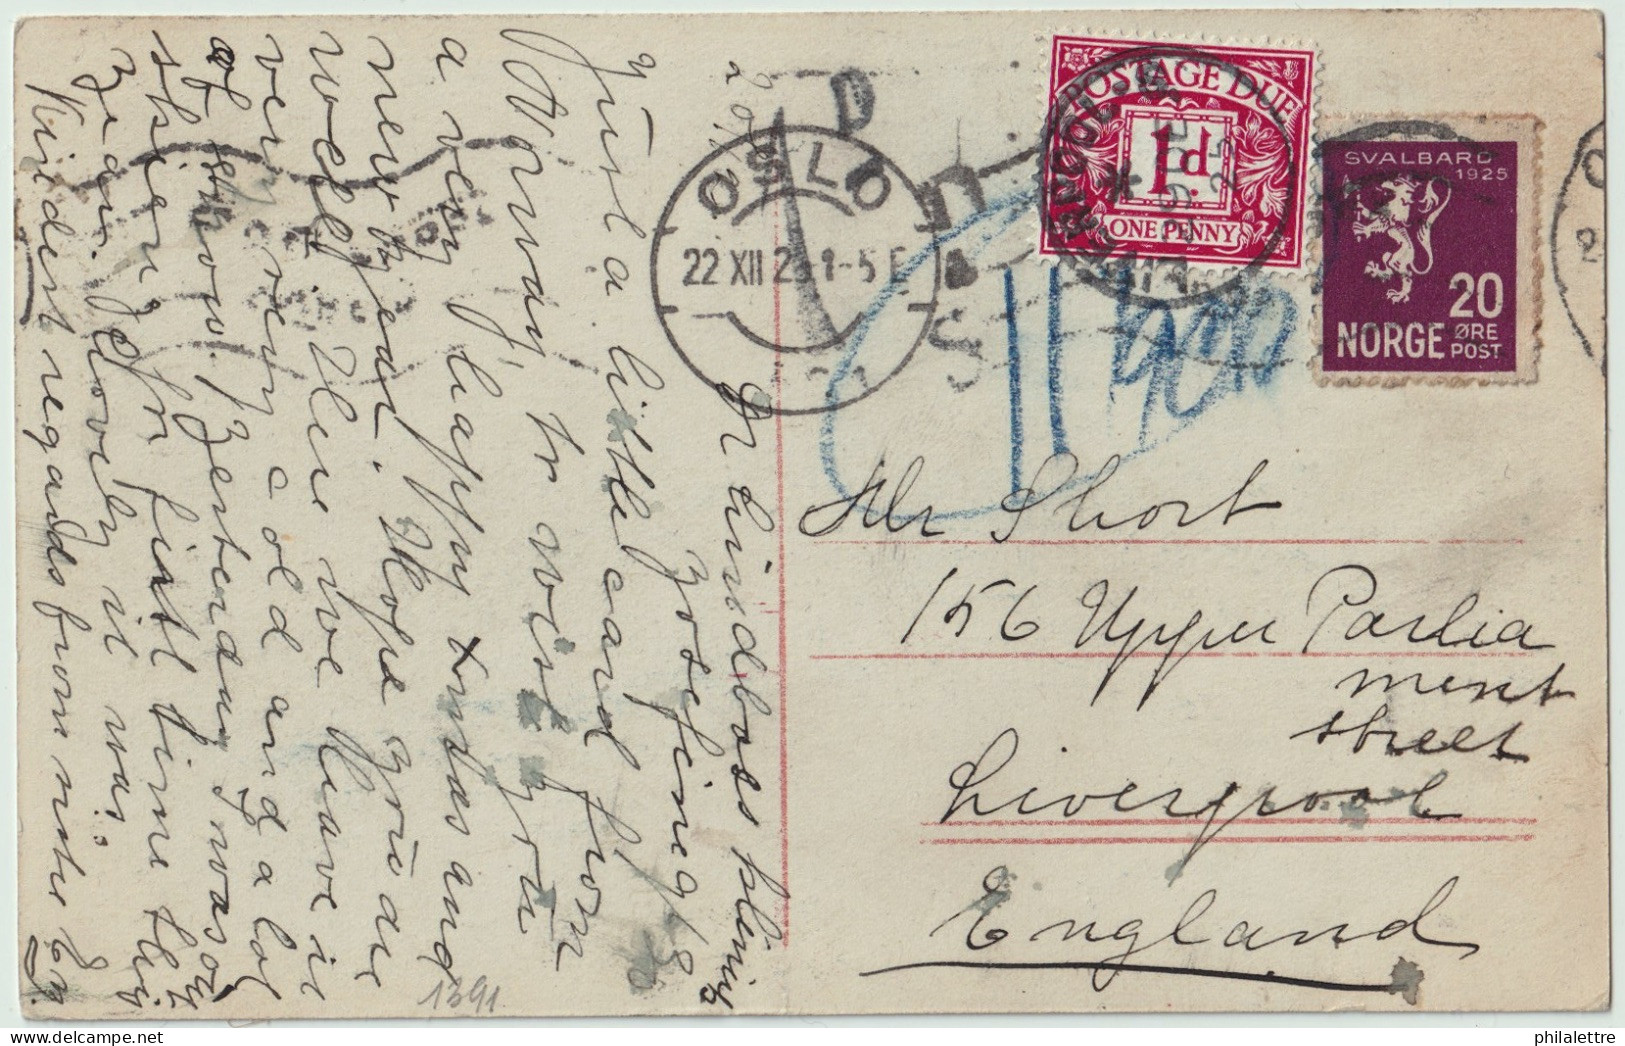 ROYAUME-UNI / UK - SG D11 On 1925 DENMARK To GB Underpaid Postage Due OSLO PPC To LIVERPOOL Franked 20 ör SVALBARD Issue - Taxe